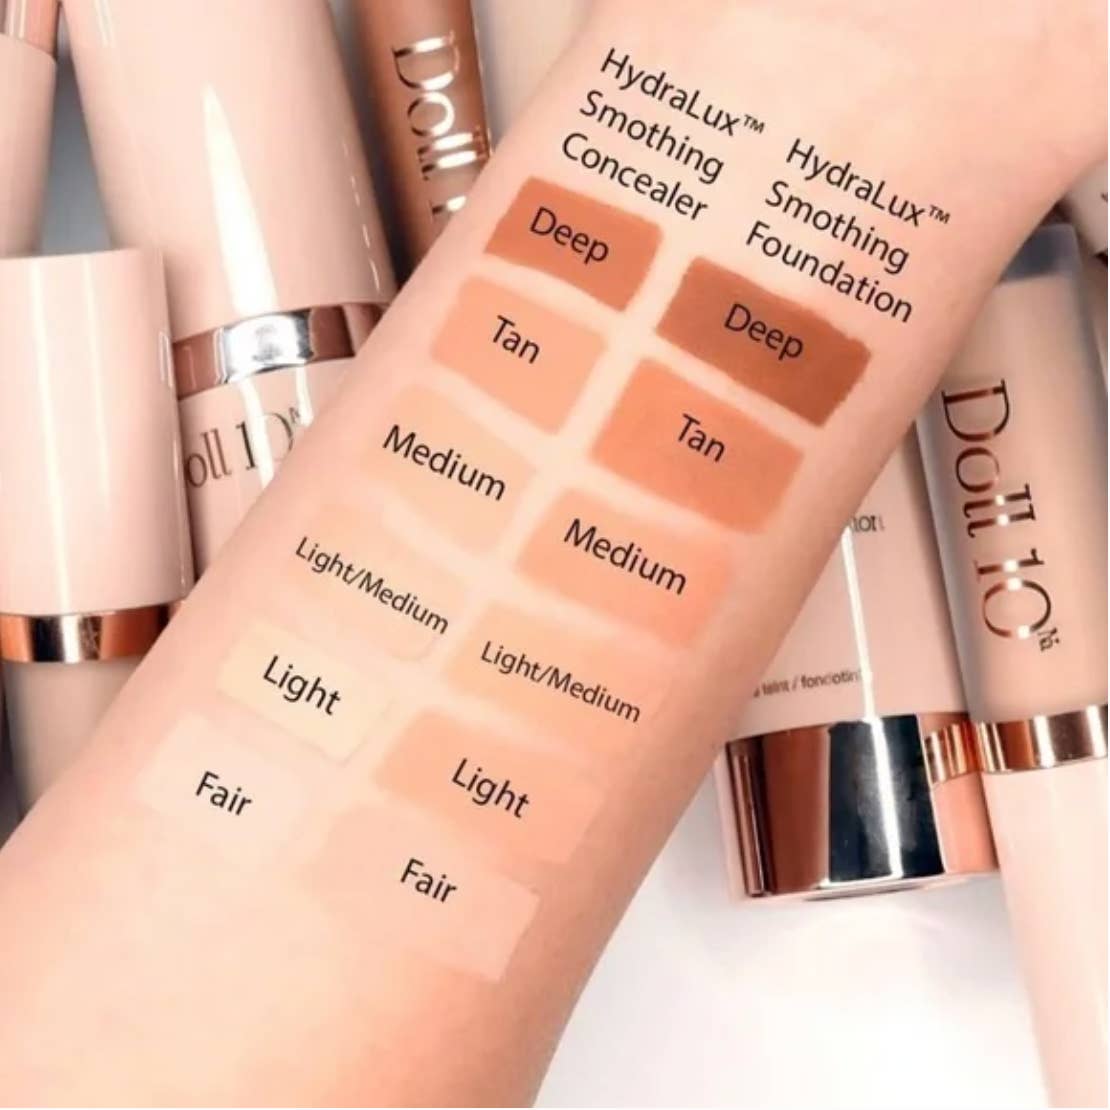 Doll 10 HydraLux™ Smoothing Foundation "DEEP"